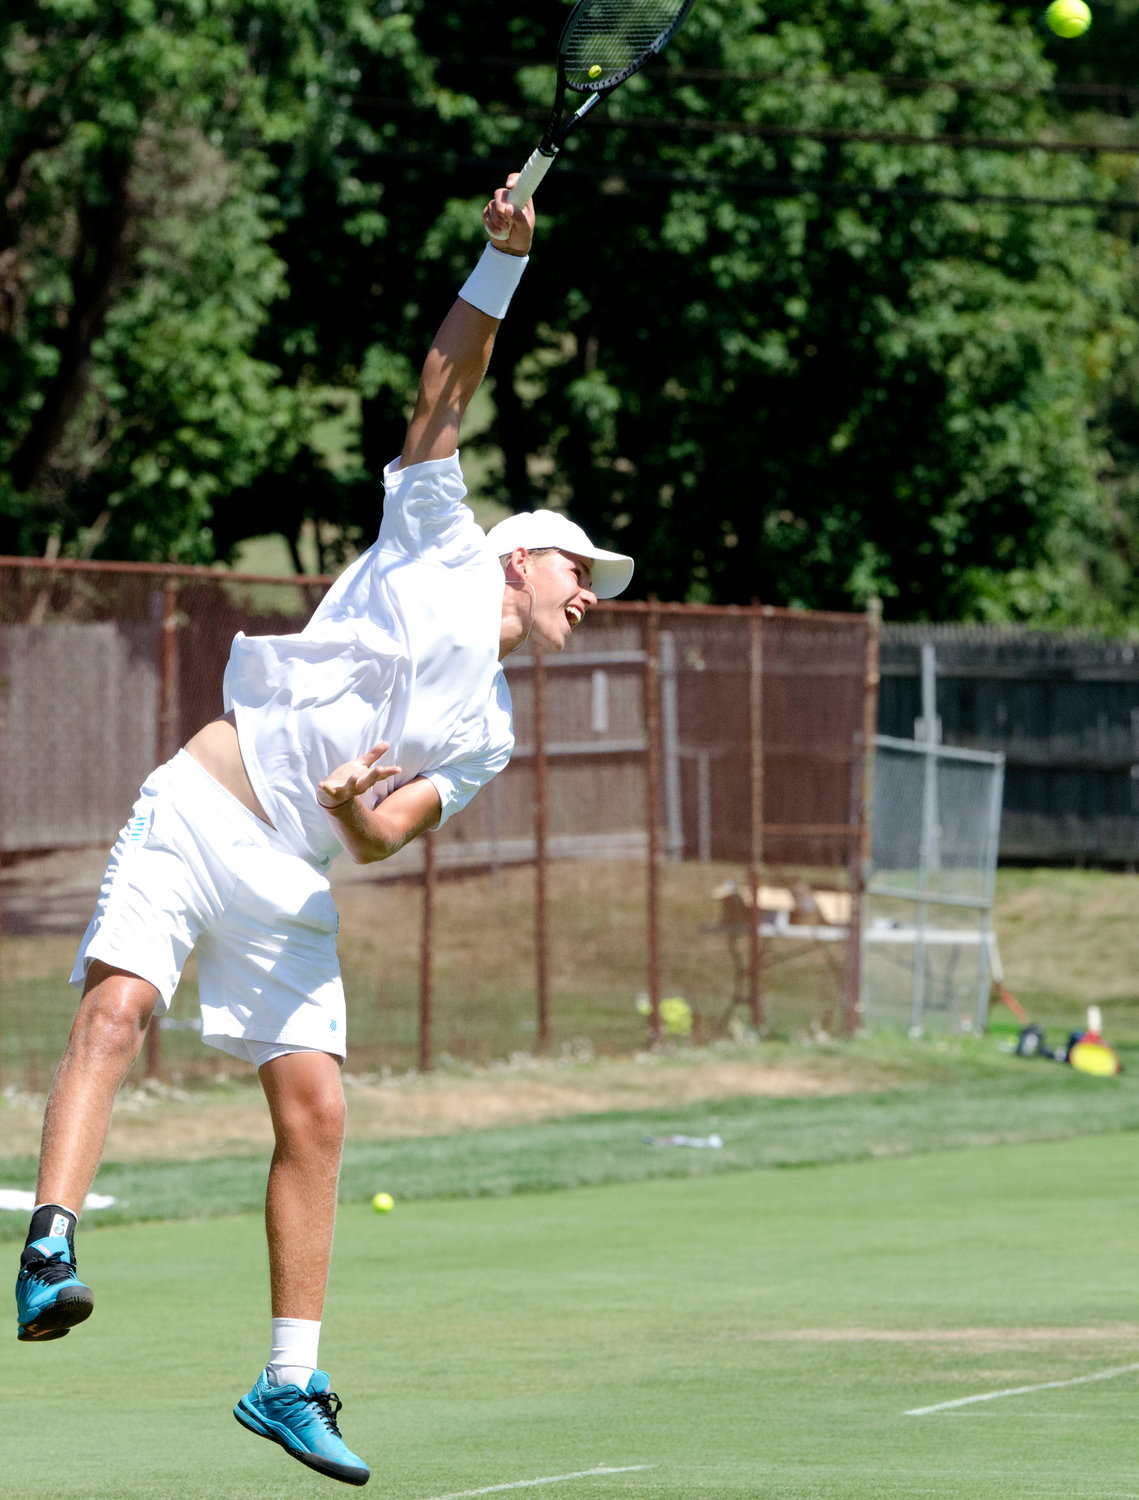 Danny Milvasky serves during singles play in the Second Annual New England Grass Court Open Tourney at the Agawam Hunt Club. Milvasky would later suffer a broken ankle in his semifinal match against eventual champion Matt Kuhar.